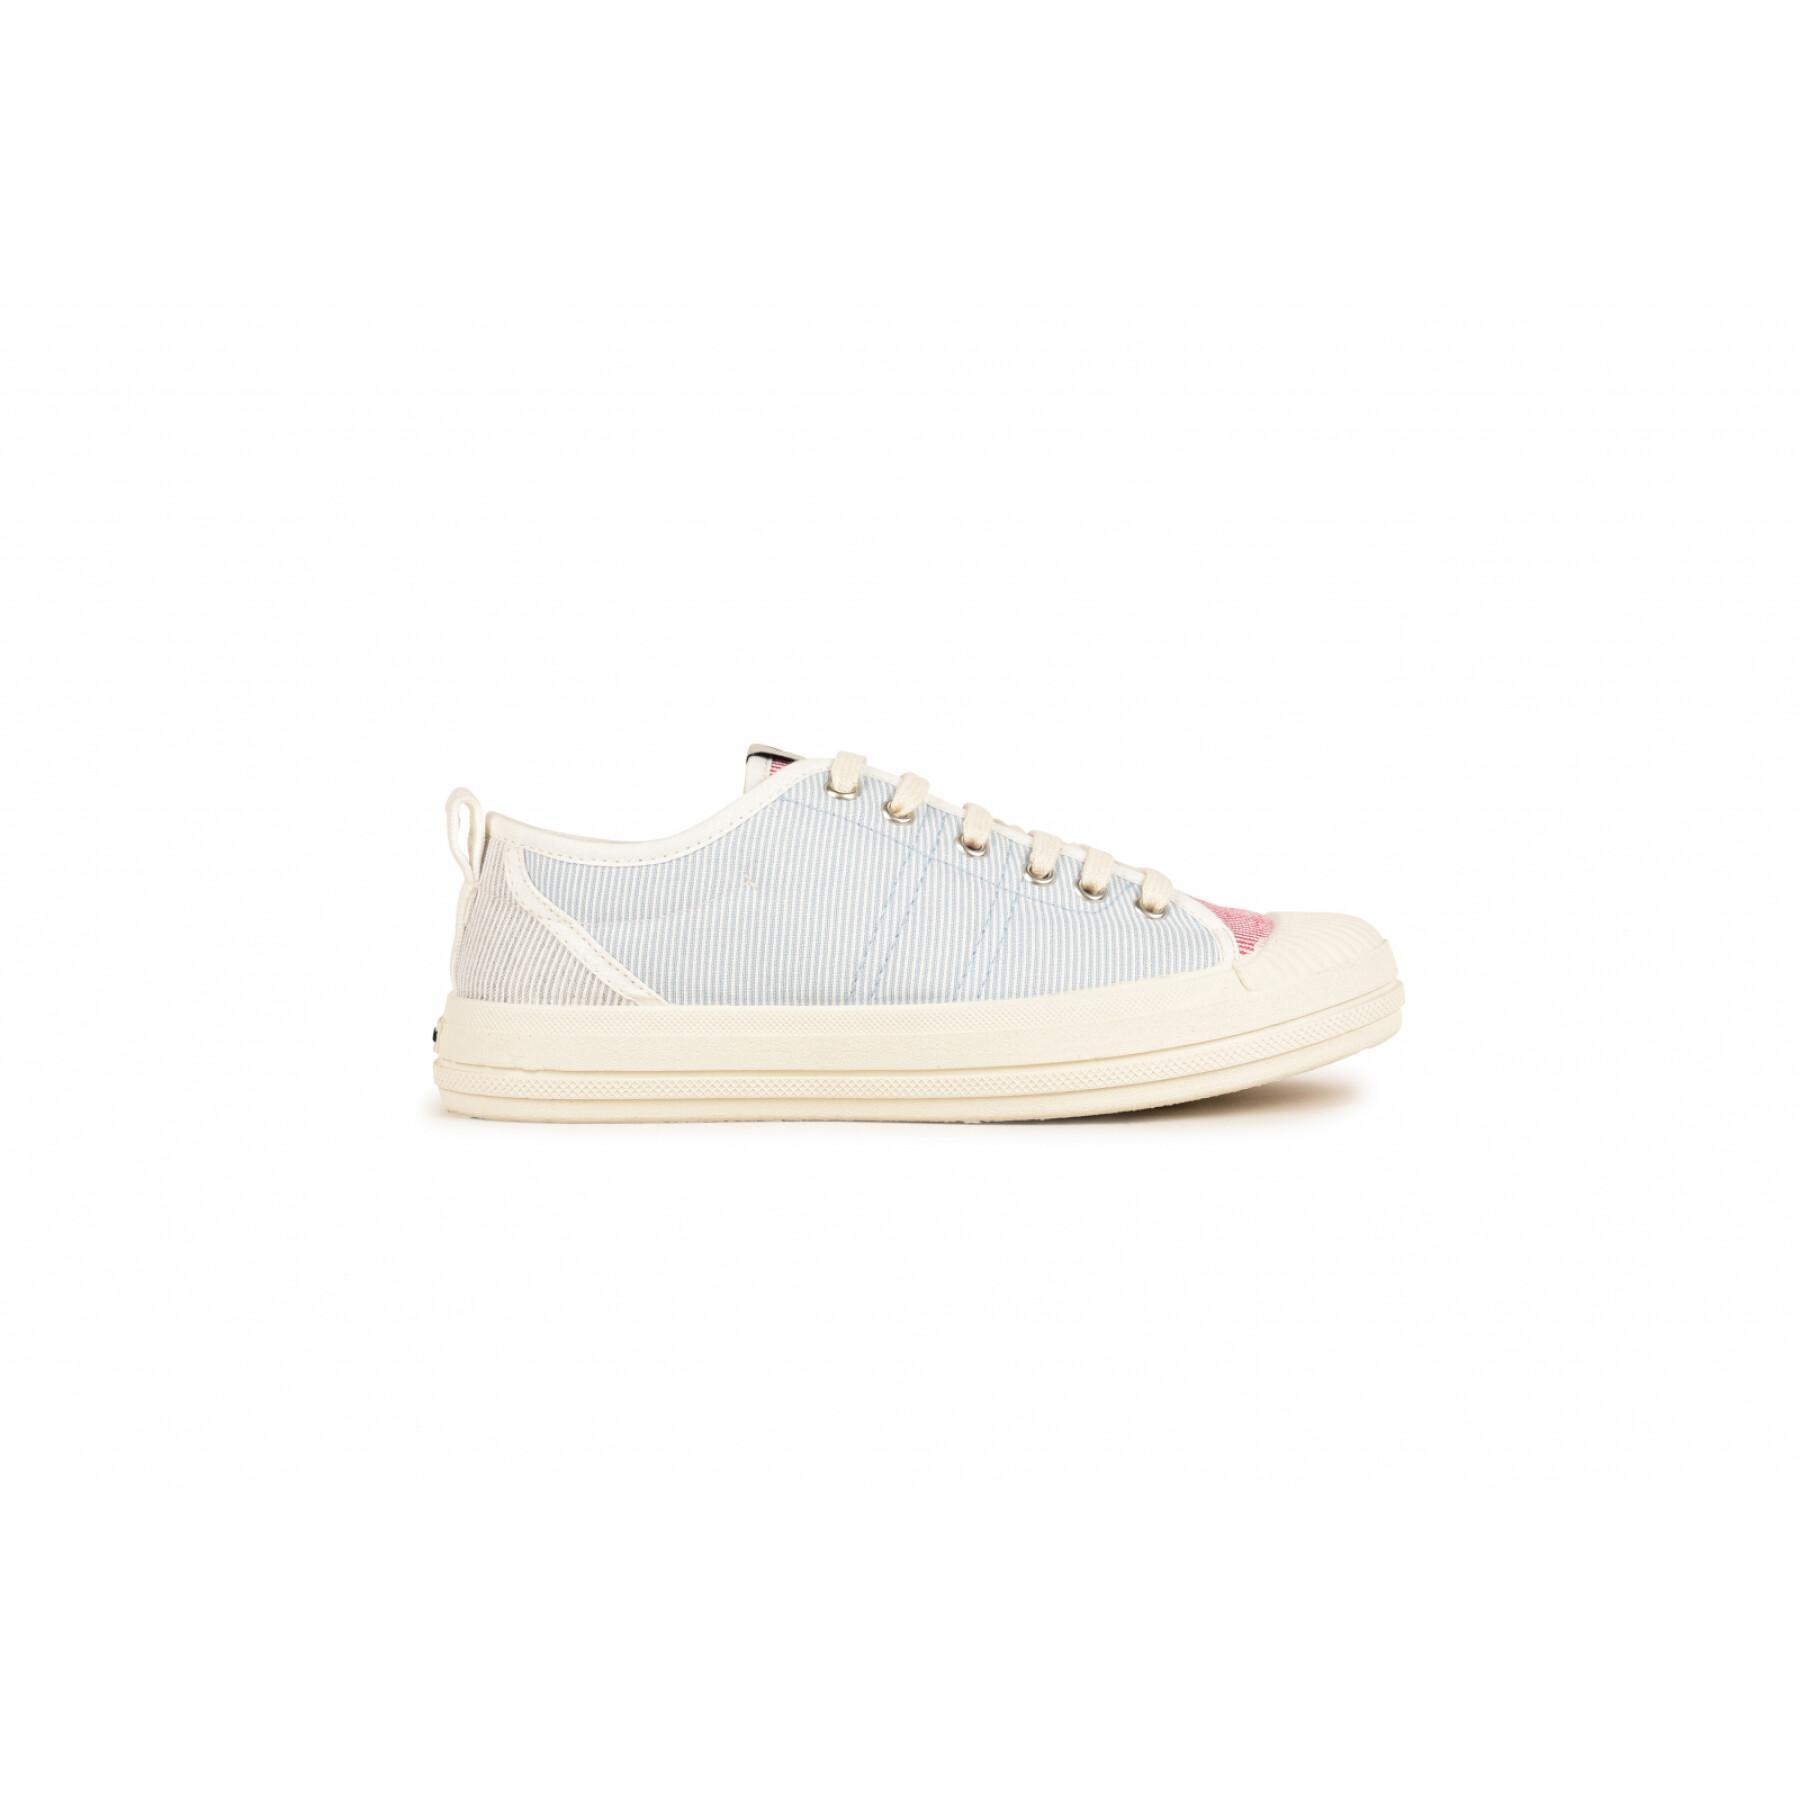 Women's low top sneakers Pataugas Etche Mix/R F2H